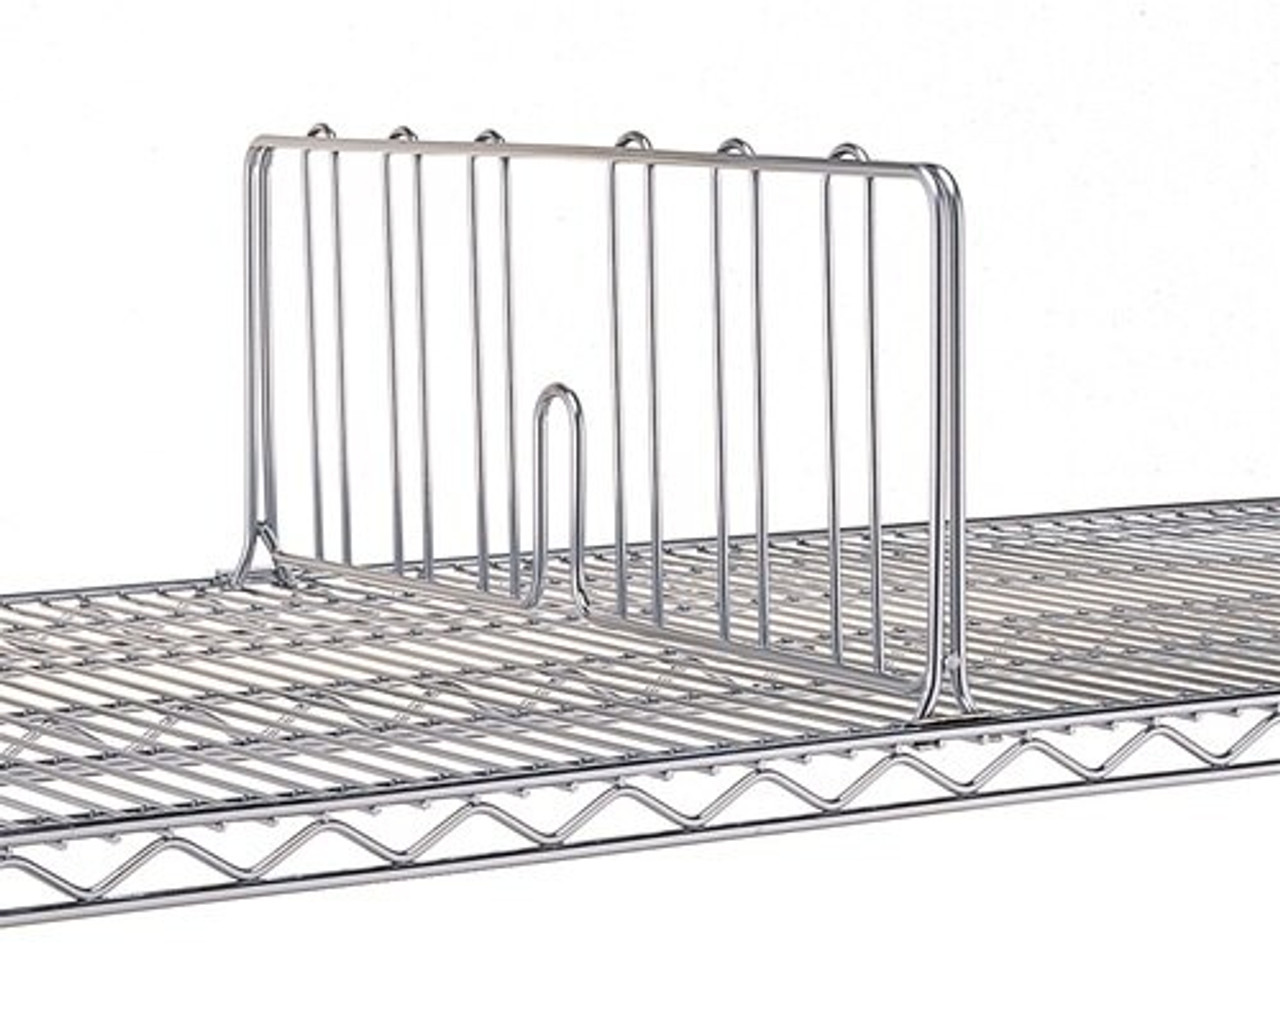 Shelving, Inc. 24D x 9H Divider for Wire Shelving, Metal, Chrome